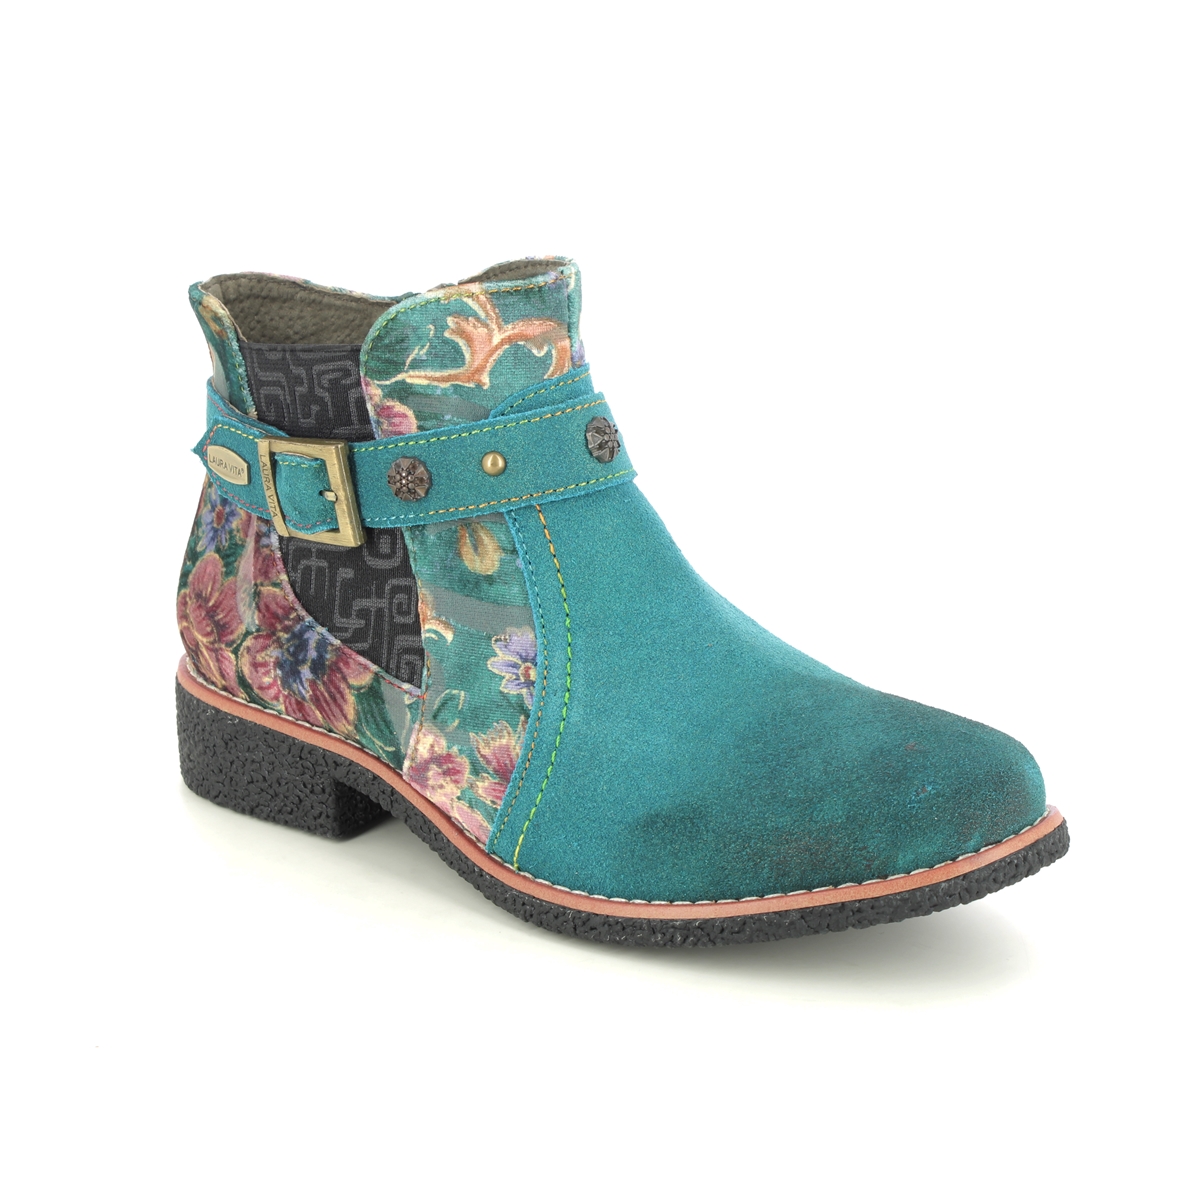 Laura Vita - Cocralieo 04 (Turquoise Leather) 4195-94 In Size 36 In Floral Turquoise Leather